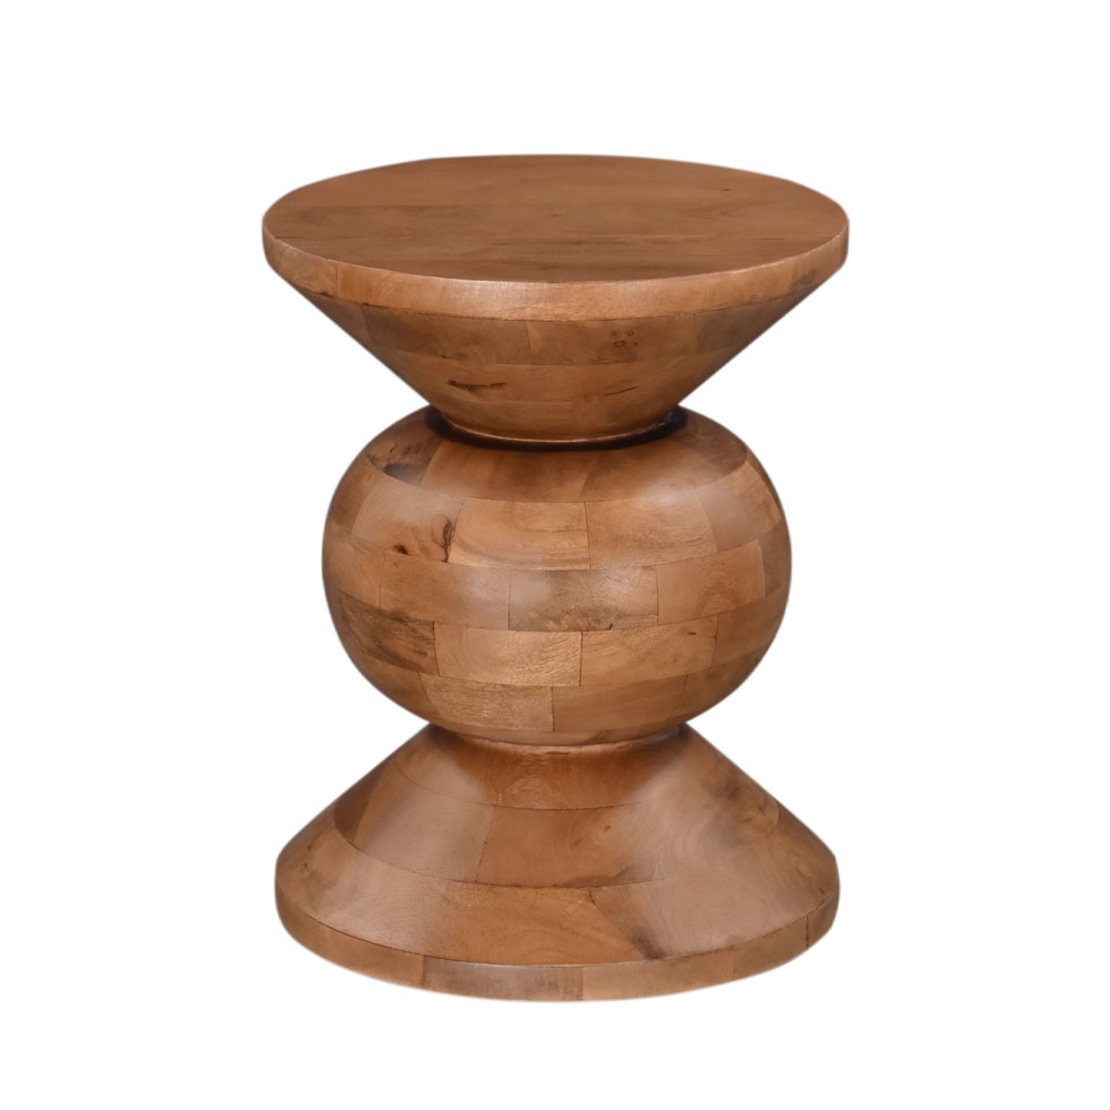 PEARL SIDE TABLE SOLID WOOD MANGO NATURAL 40x40xH5